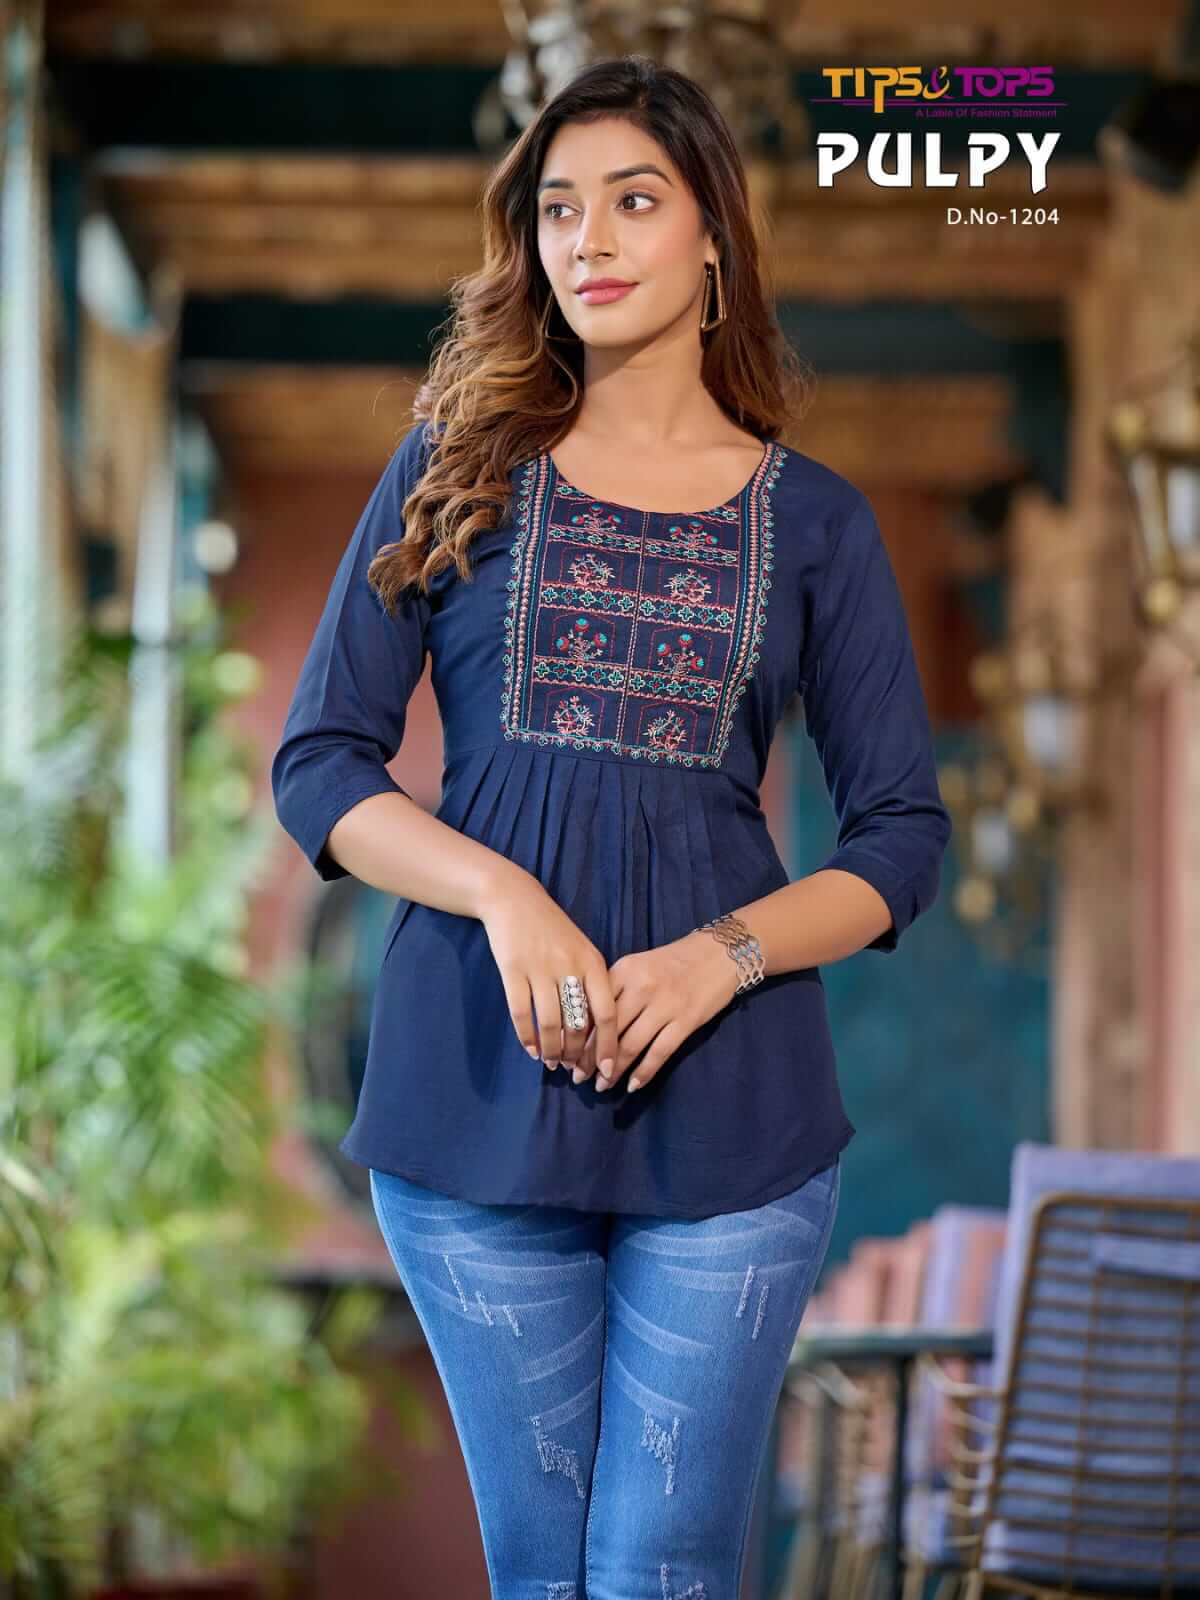 Tips Tops Pulpy vol 12 Ladies Tops collection 2